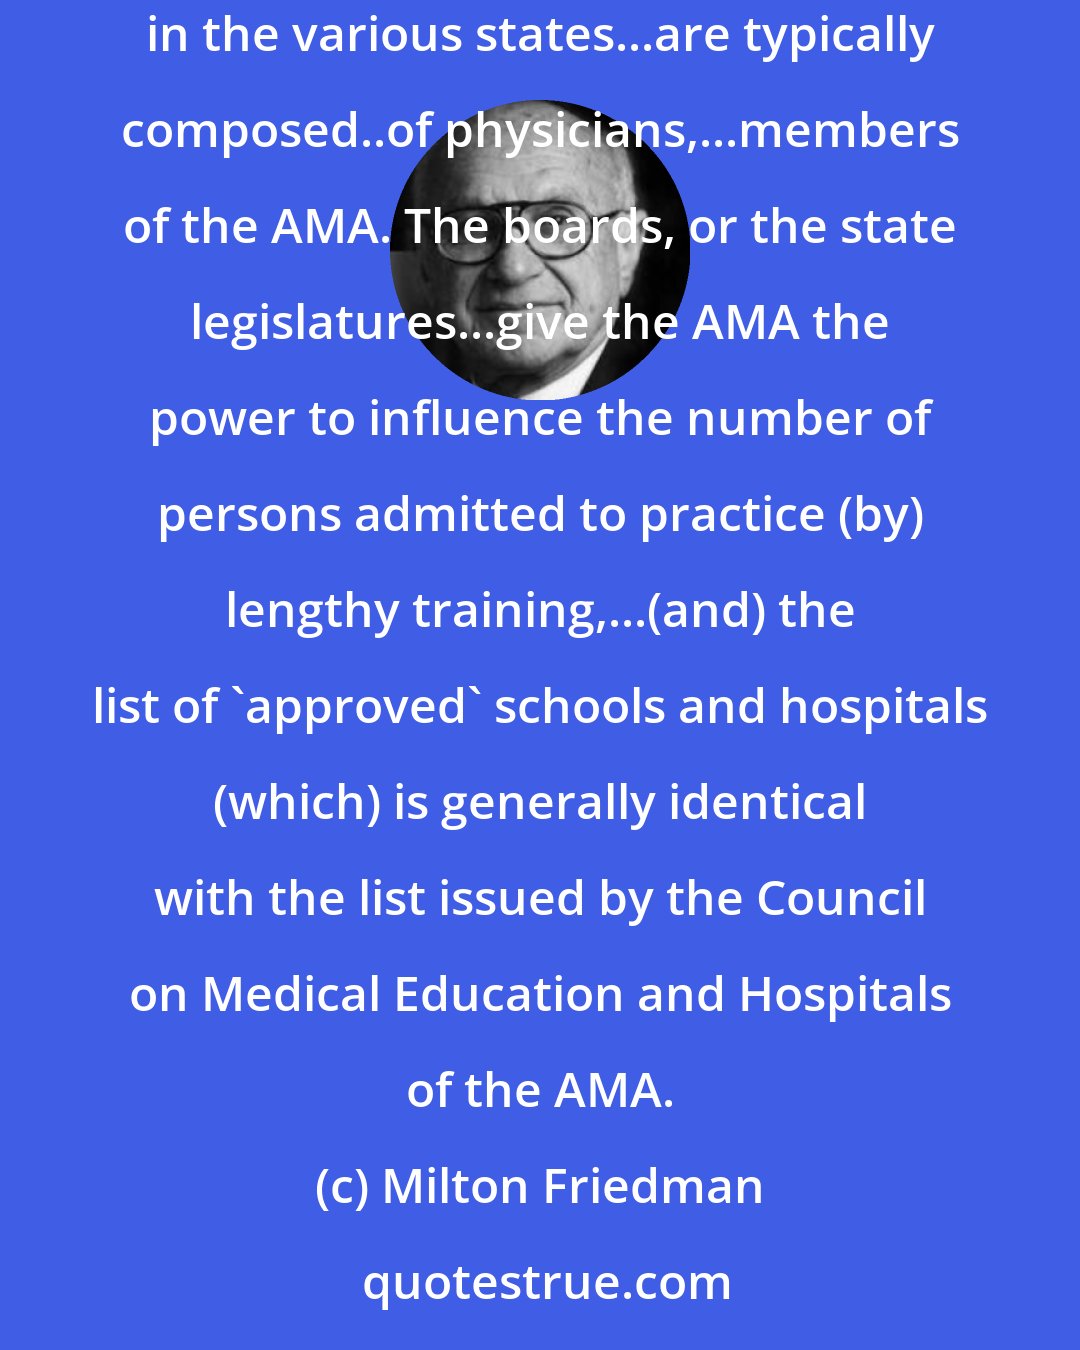 Milton Friedman: ...Only physicians are likely to be regarded as competent to judge the qualifications of potential physicians, so licensing boards in the various states...are typically composed..of physicians,...members of the AMA. The boards, or the state legislatures...give the AMA the power to influence the number of persons admitted to practice (by) lengthy training,...(and) the list of 'approved' schools and hospitals (which) is generally identical with the list issued by the Council on Medical Education and Hospitals of the AMA.